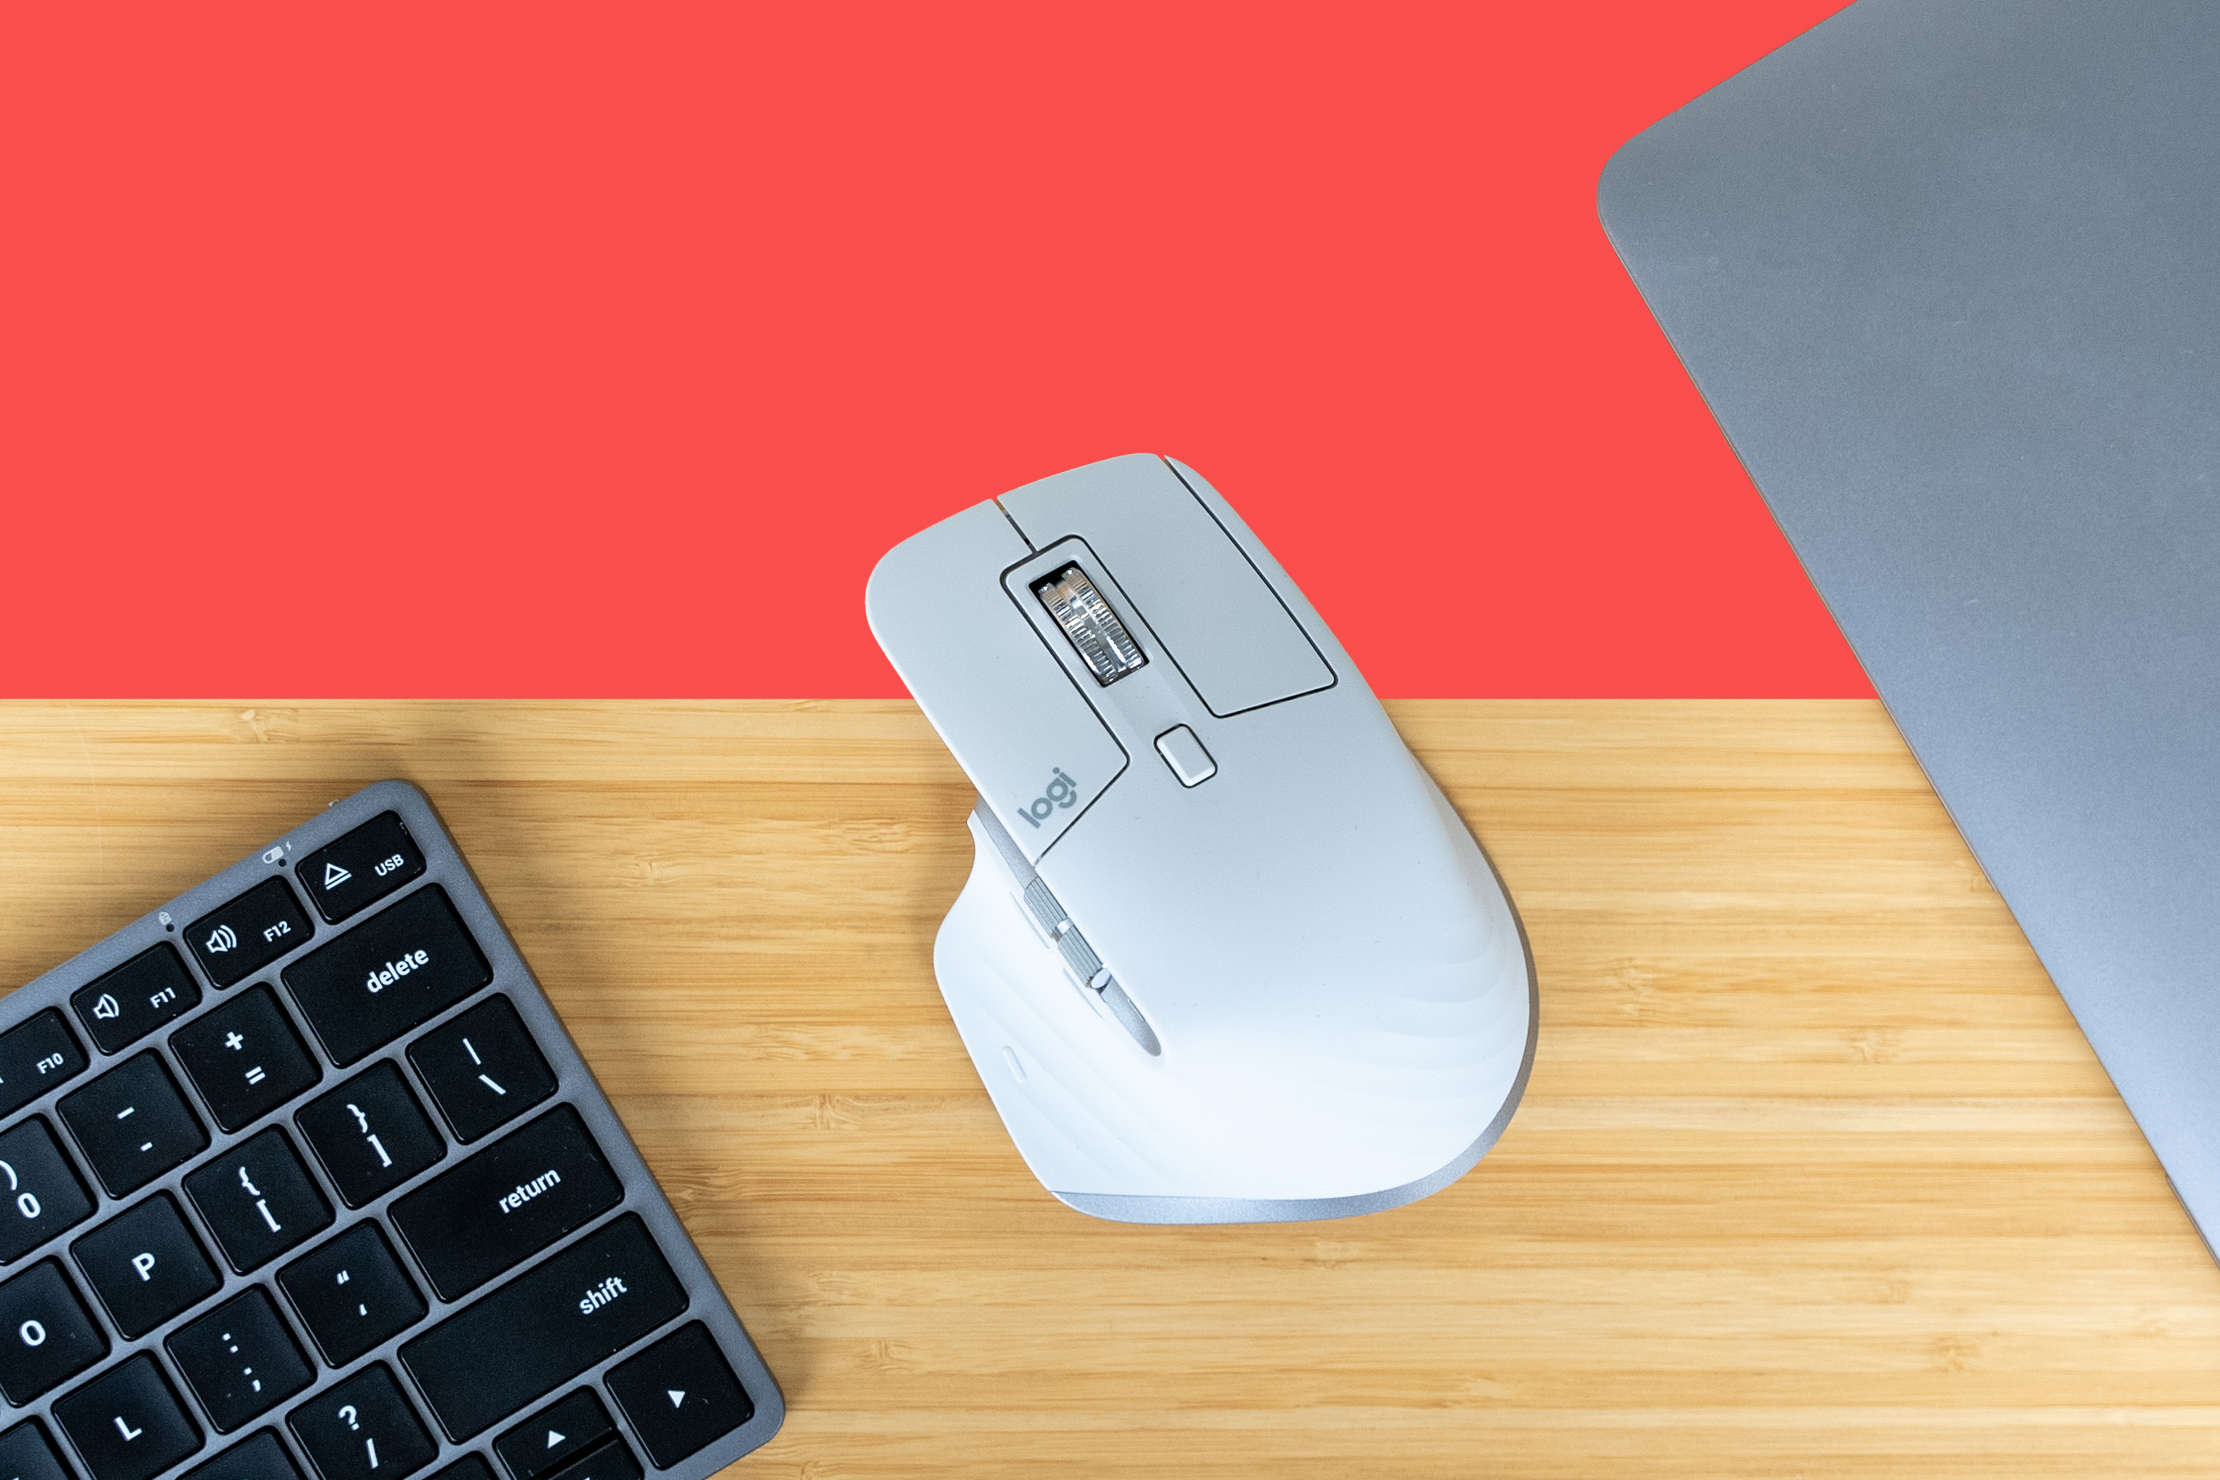 8 Best Wireless Mouse Reviews in 2023 - Top-Rated Bluetooth